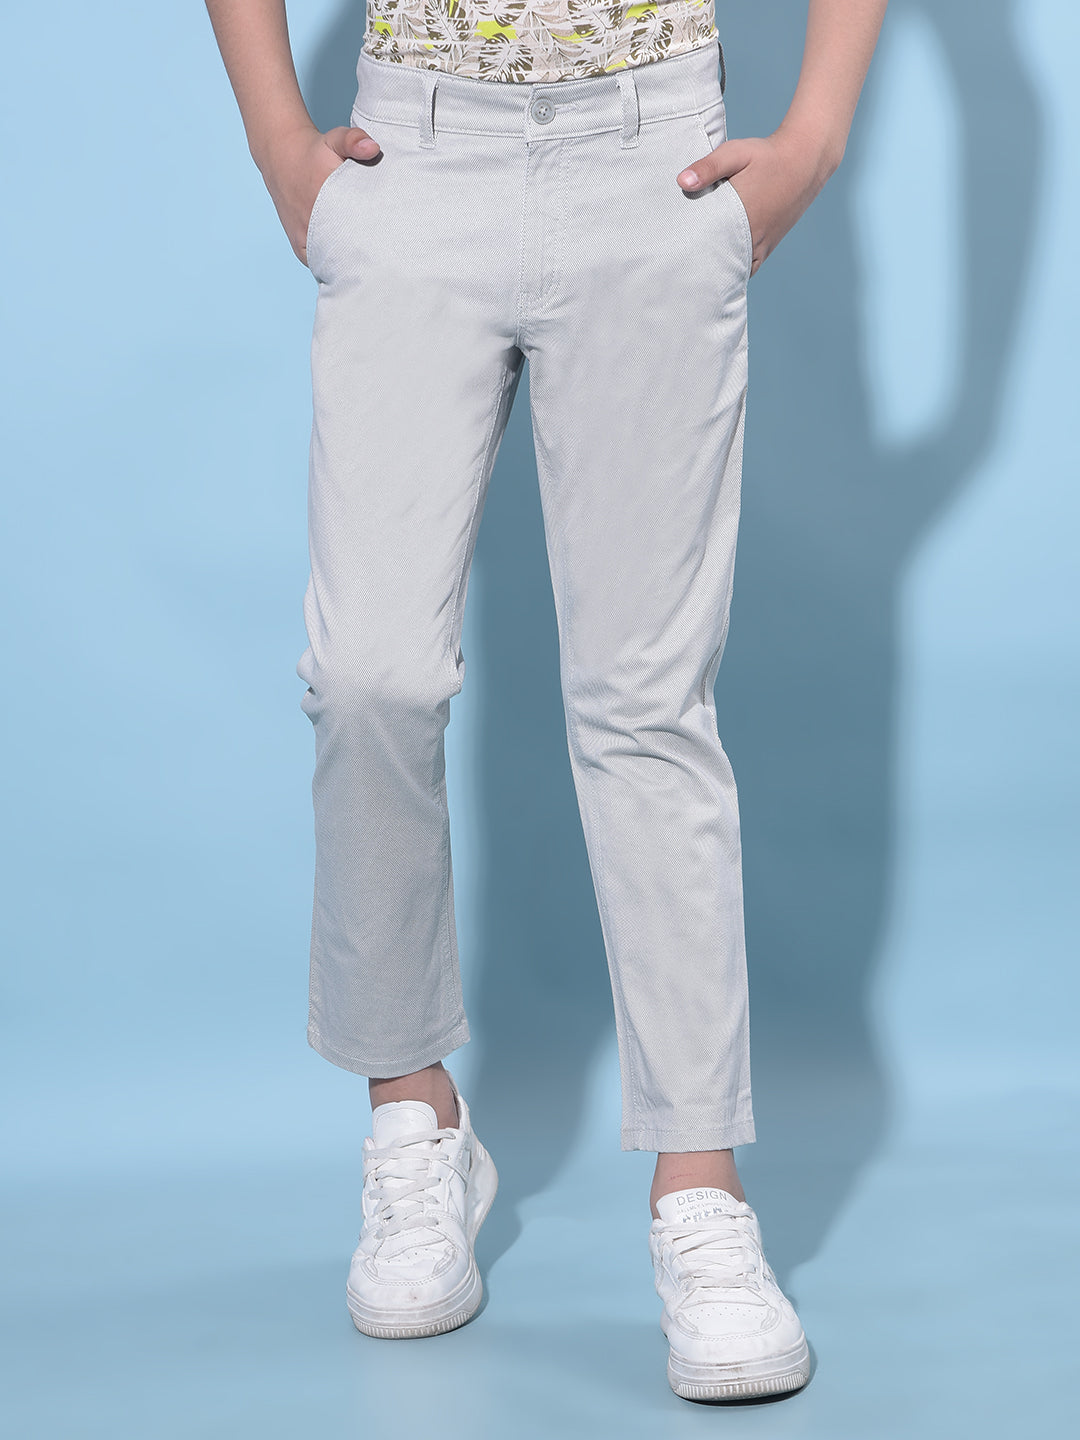 Grey Printed Cotton Chinos Trousers-Boys Trousers-Crimsoune Club